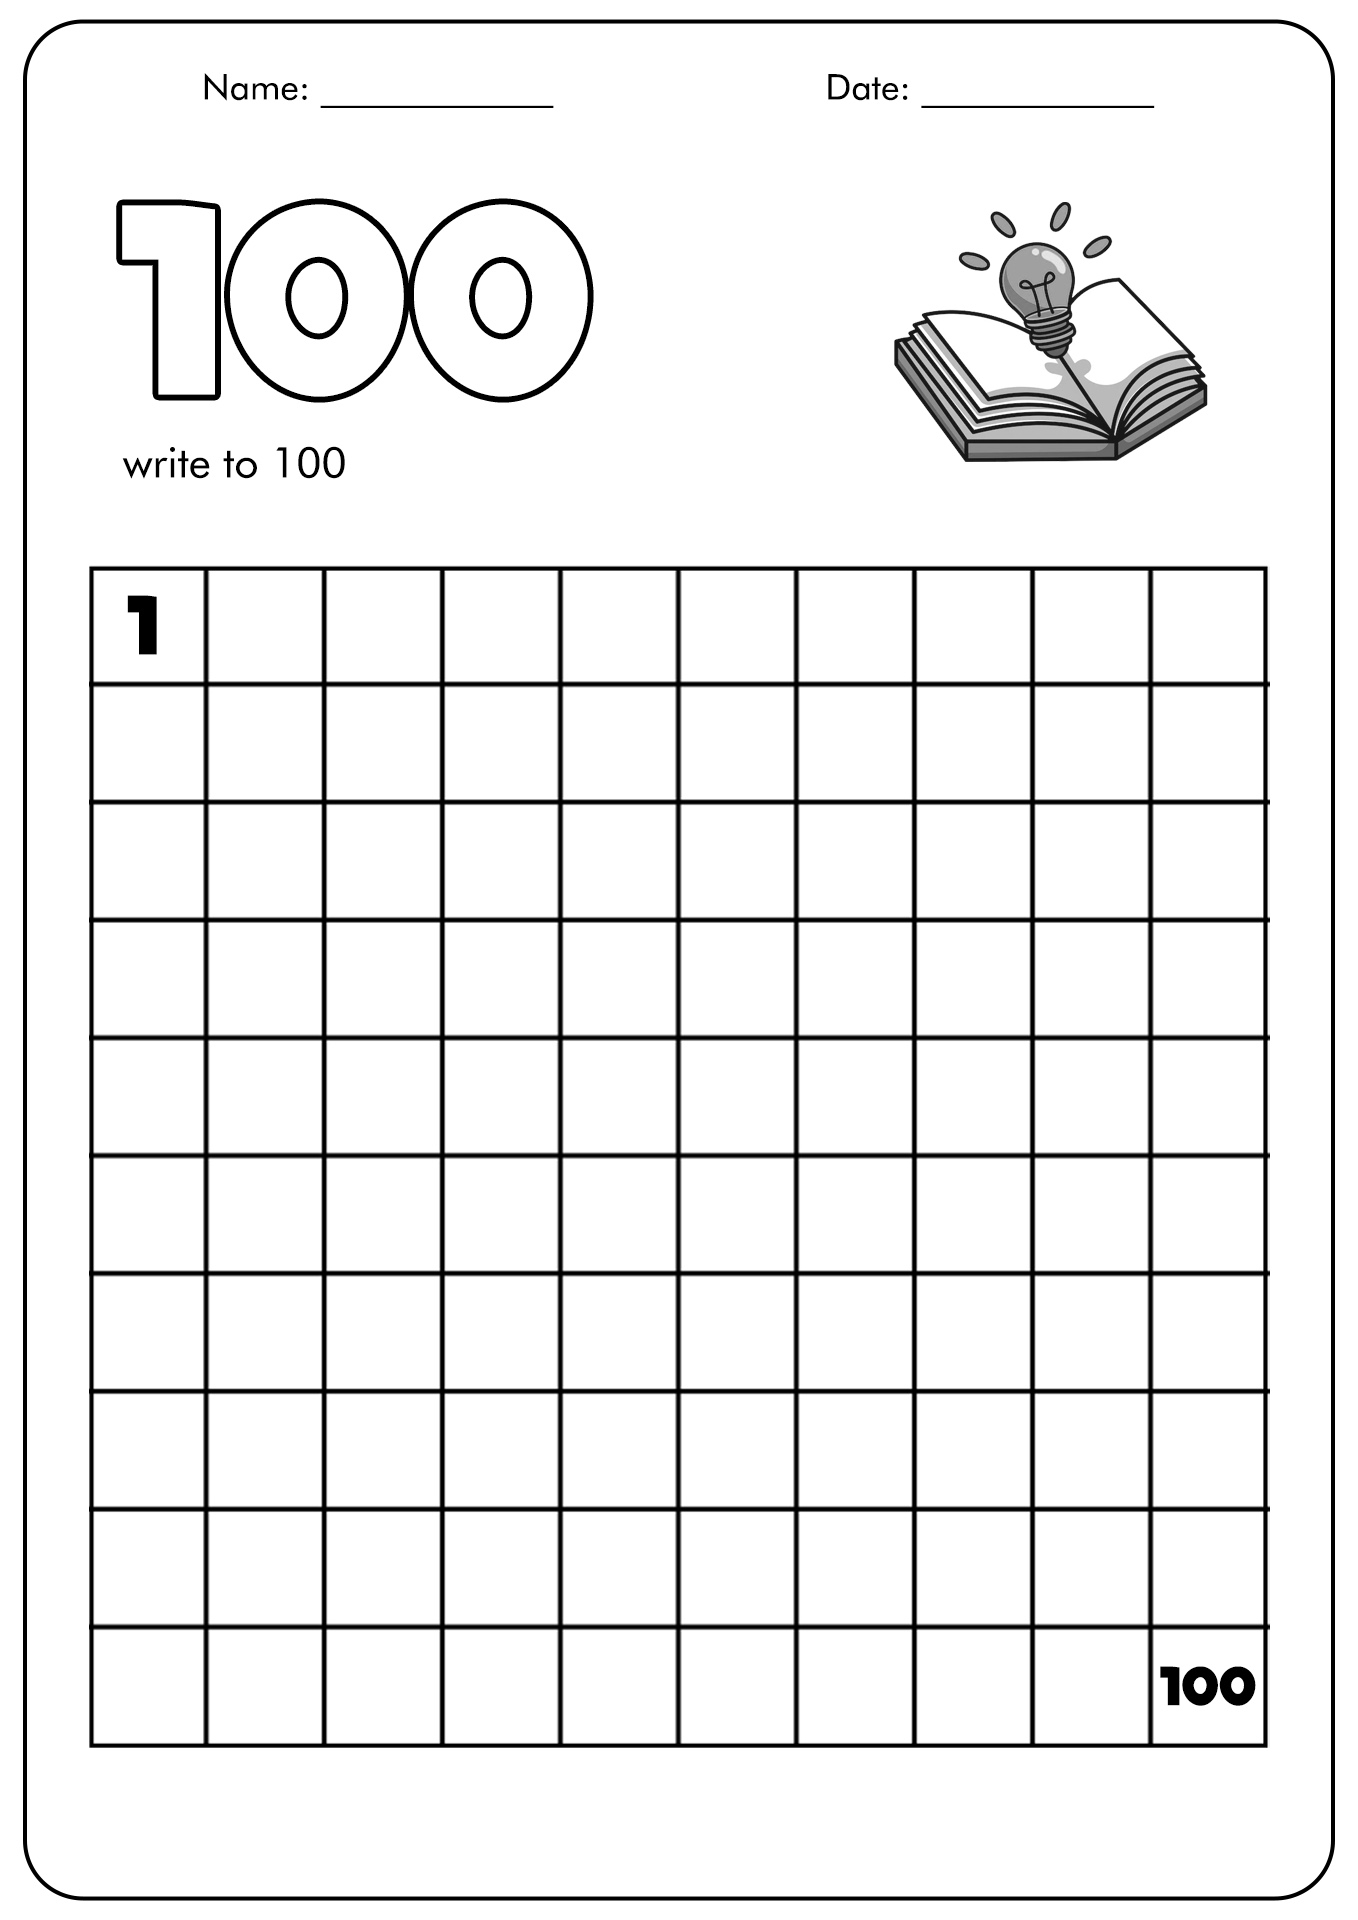 learning-to-count-to-100-worksheets